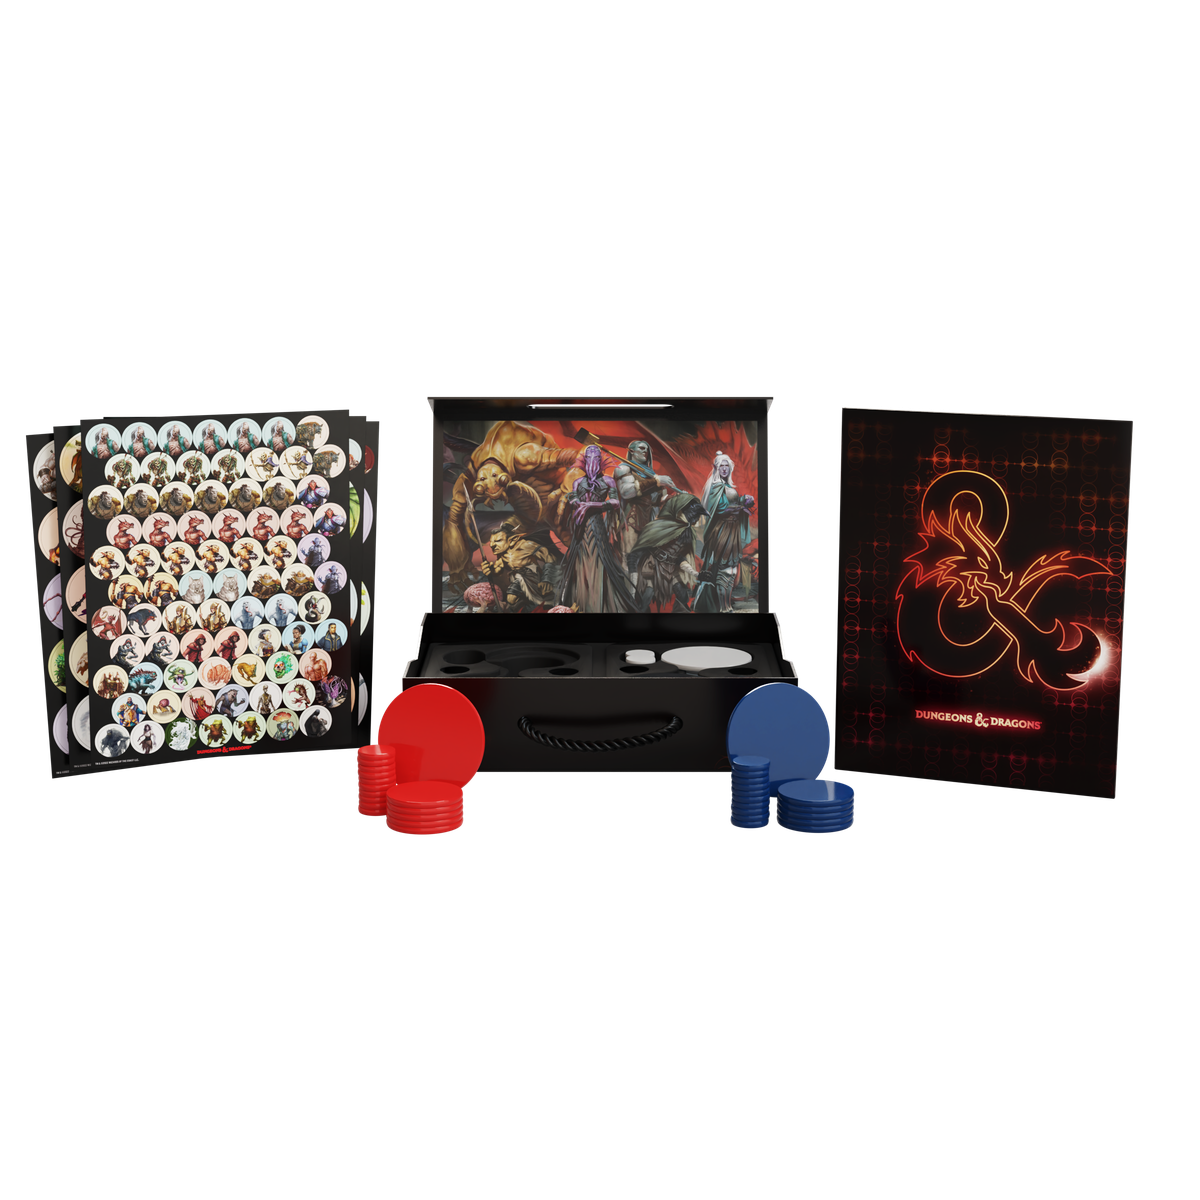 A product image showing illustrated stickers, several sizes of plastic tokens, and the carrying case for the Creature Campaign Case.